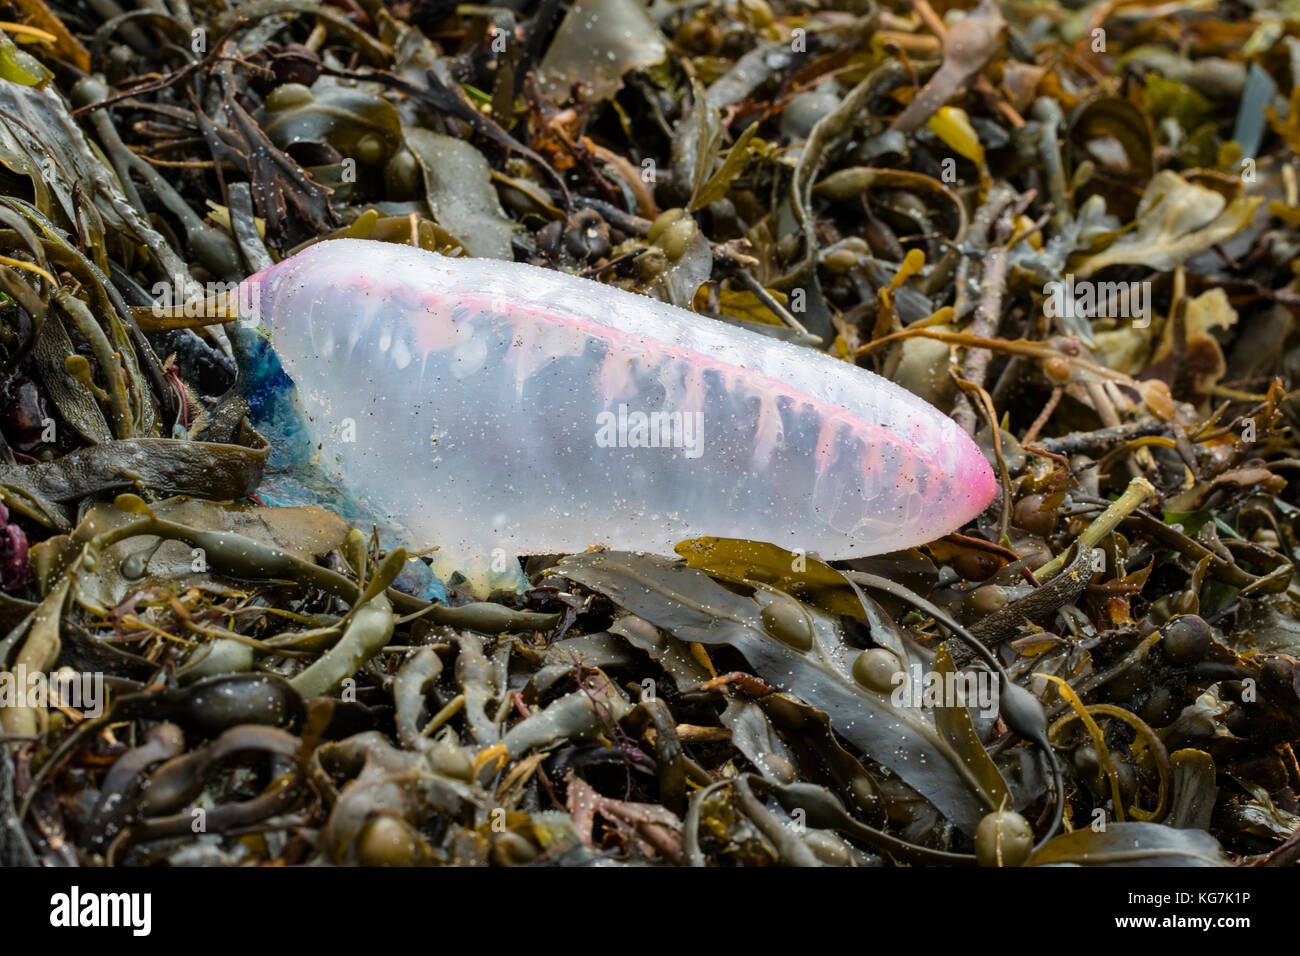 Atlantic Portuguese man o' war (Physalia physalis) washed up on beach, St Mary's, Isles of Scilly Stock Photo